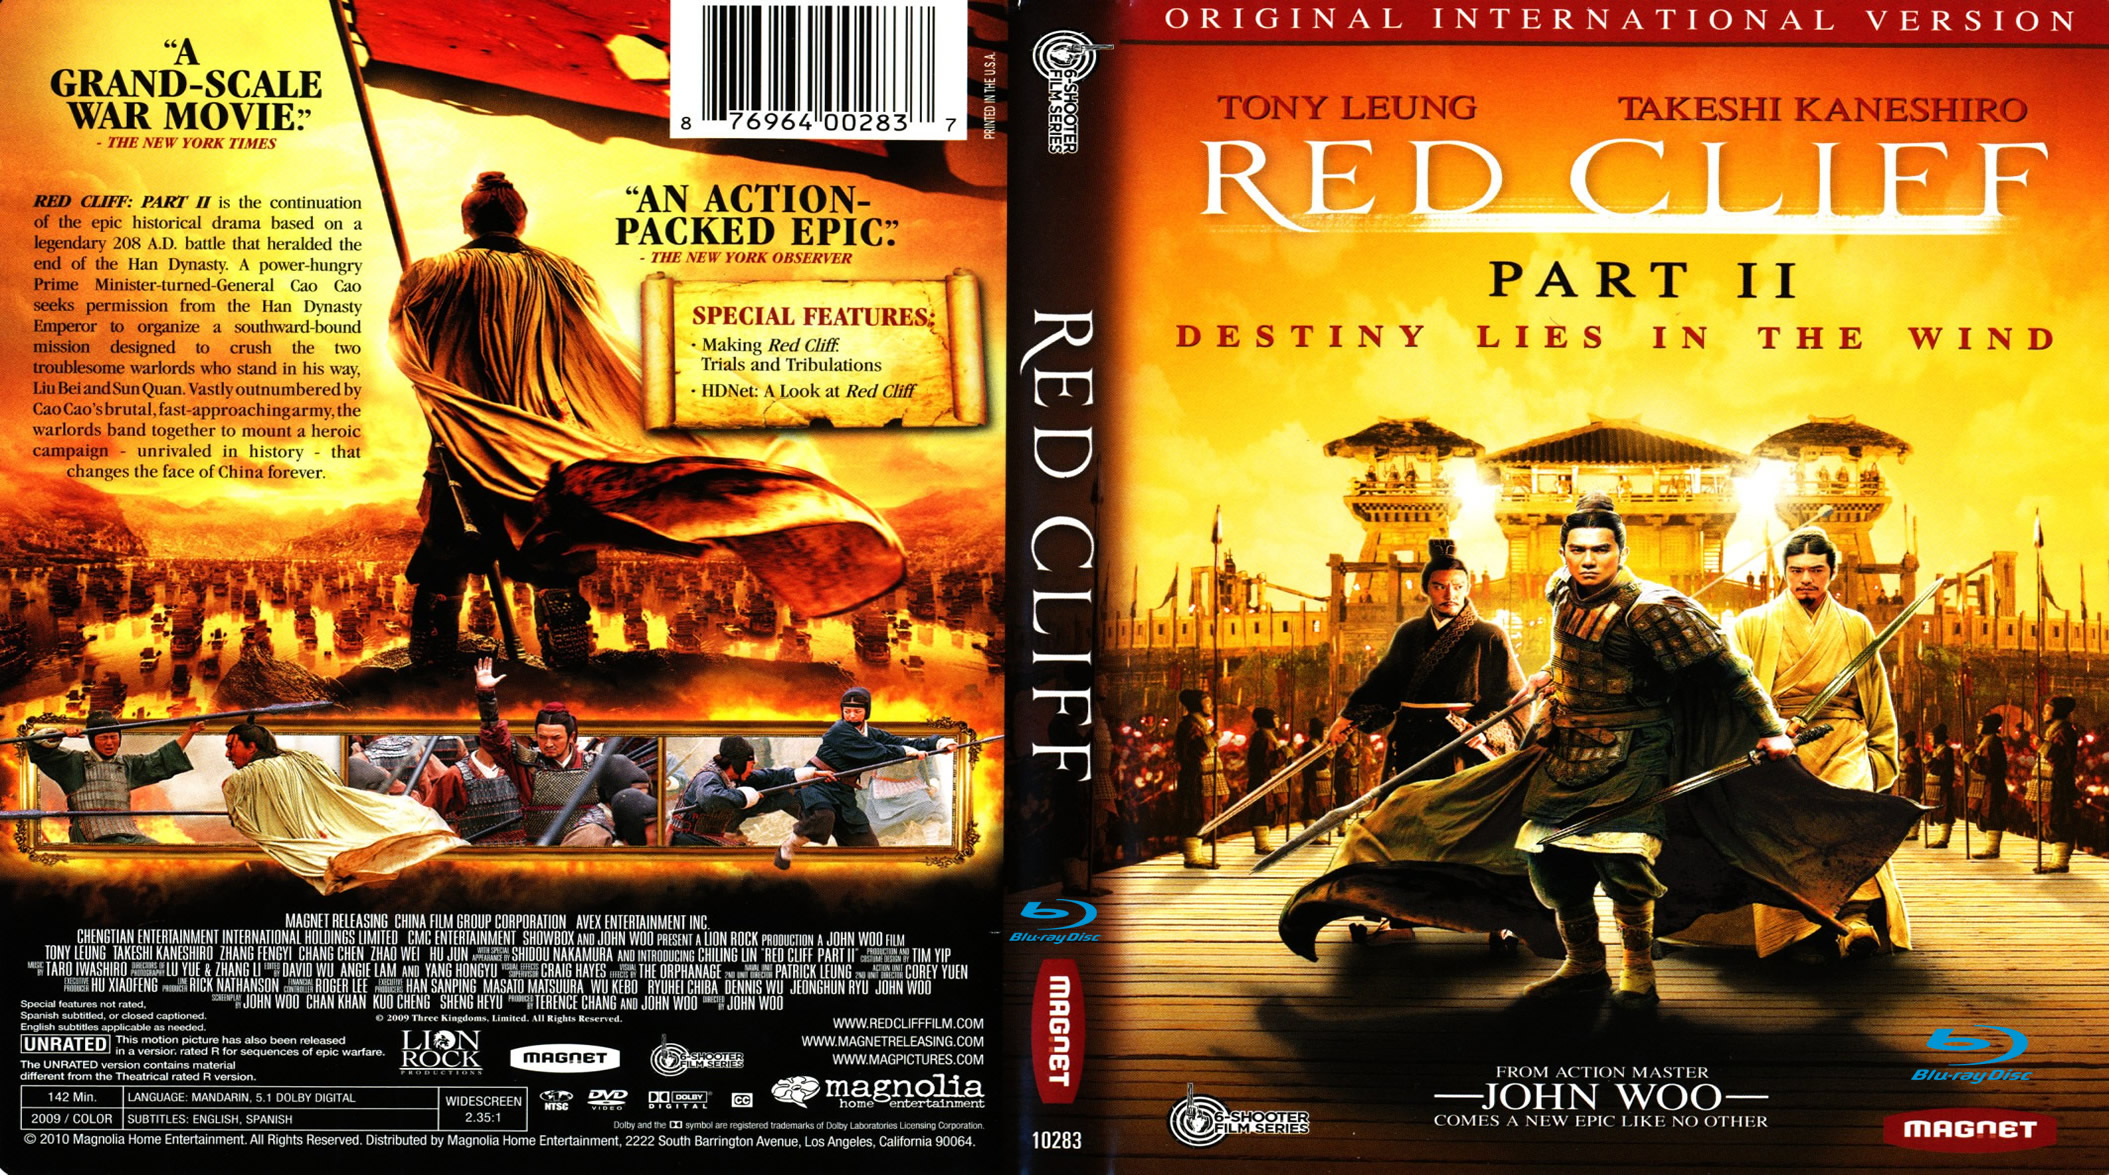 arve Monograph Manners COVERS.BOX.SK ::: Red Cliff Part 2 (2009) - high quality DVD / Blueray /  Movie